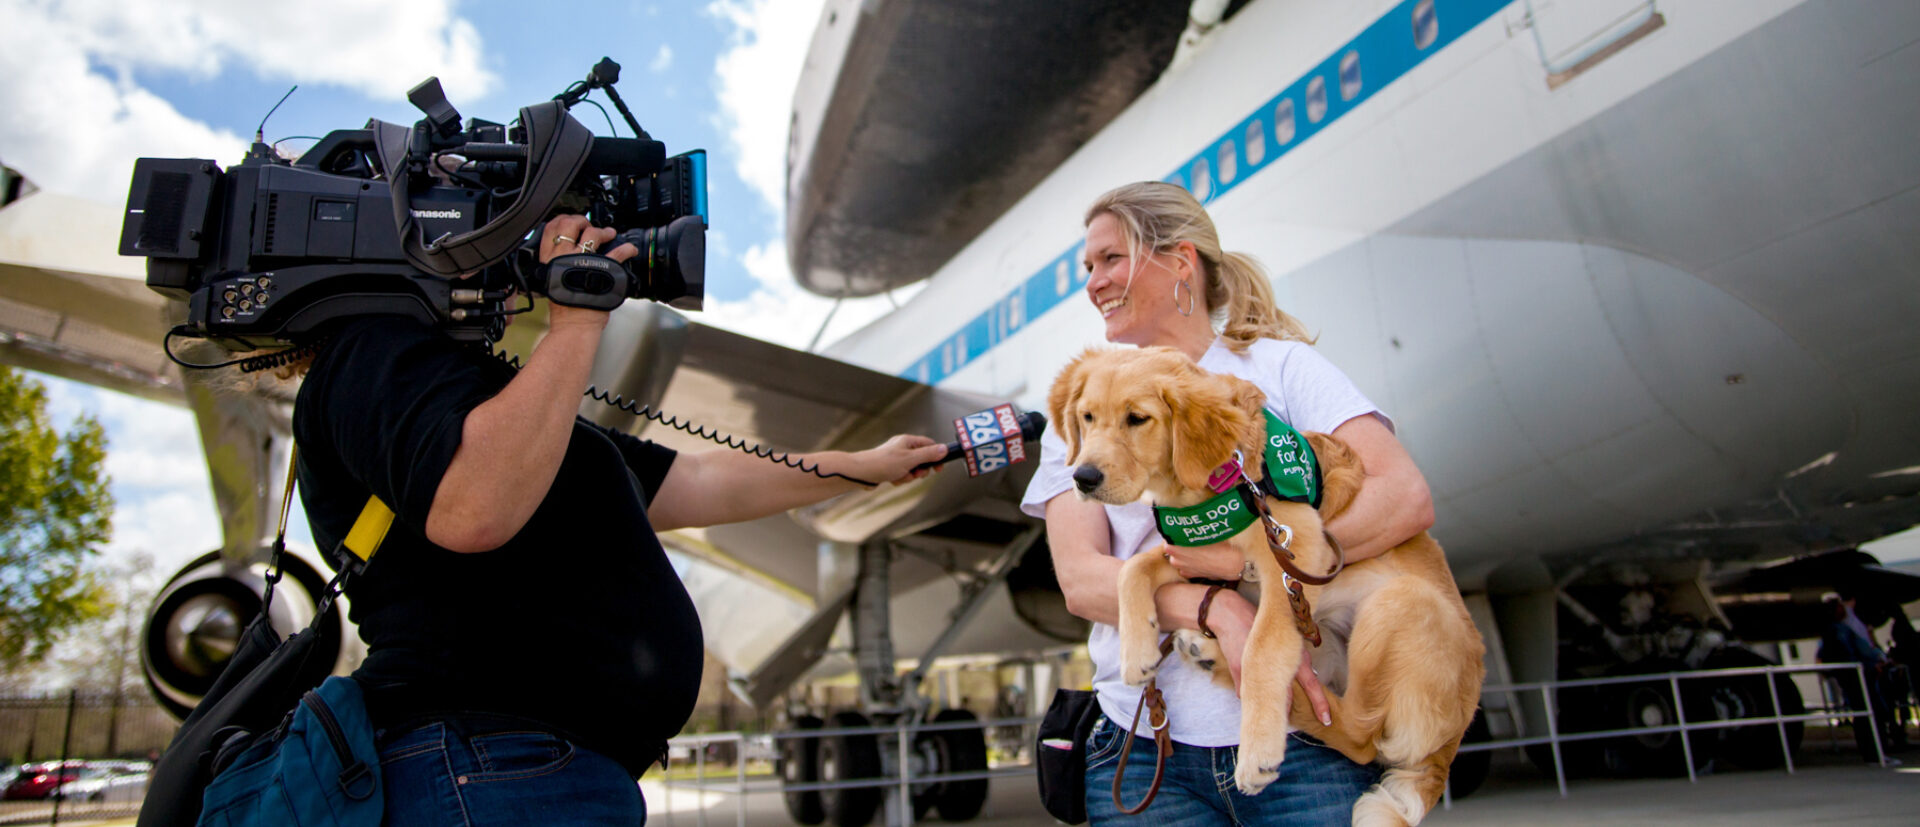 A television reporter interviews a Guide Dogs for the Blind puppy raising volunteer who holds a Golden Retriever guide dog puppy in front of the space shuttle at the NASA Museum.